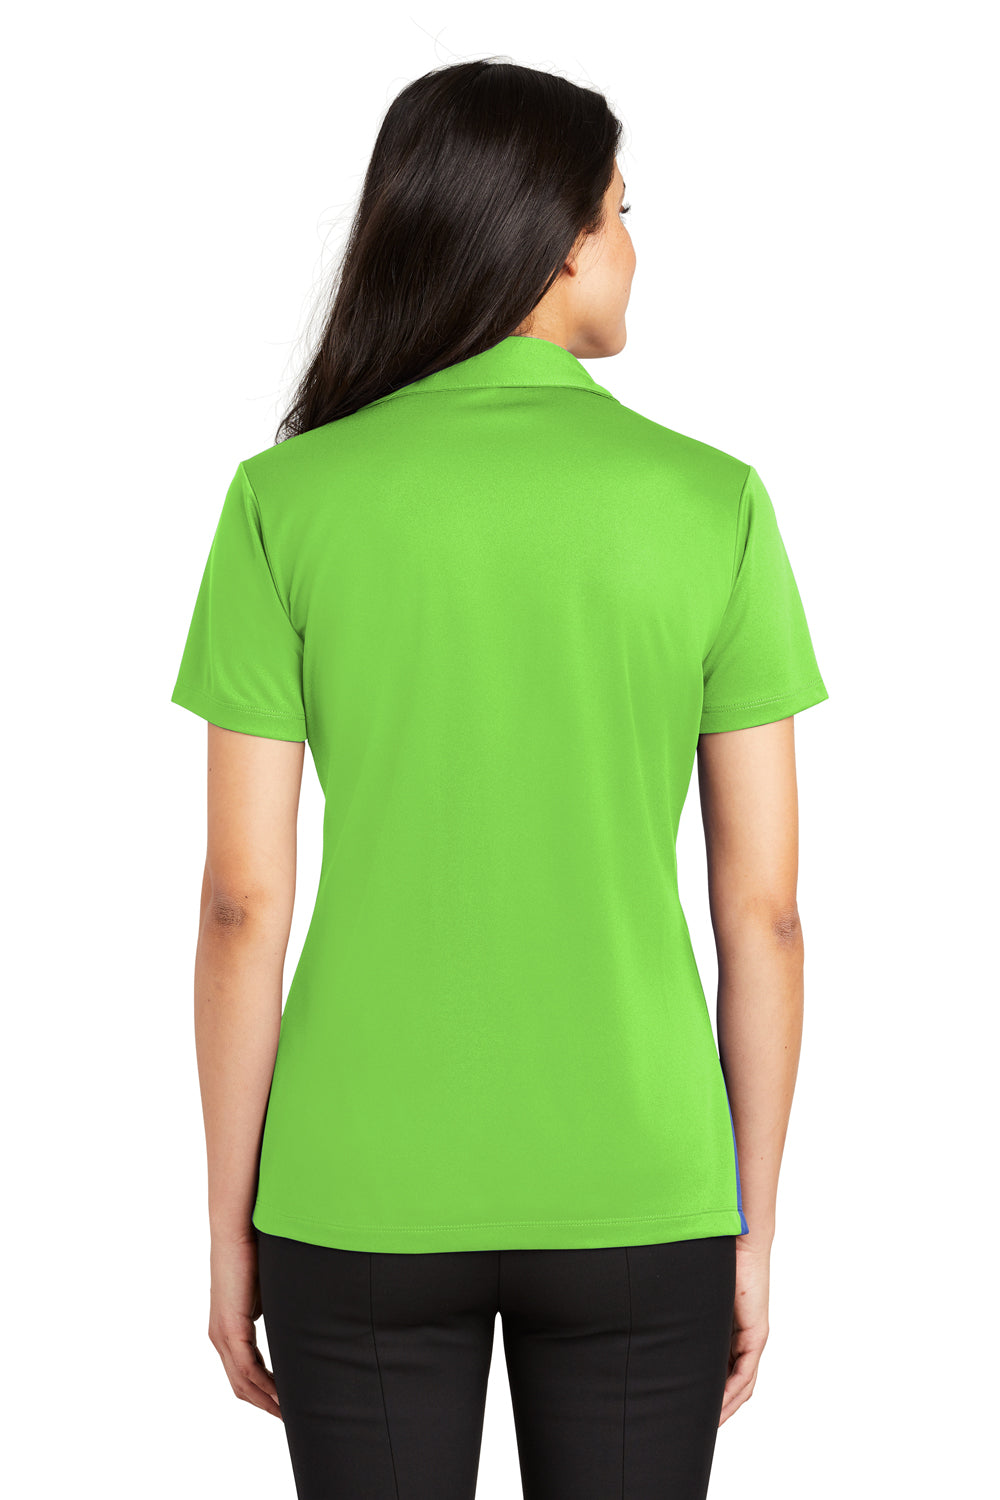 Port Authority L540 Womens Silk Touch Performance Moisture Wicking Short Sleeve Polo Shirt Lime Green Back